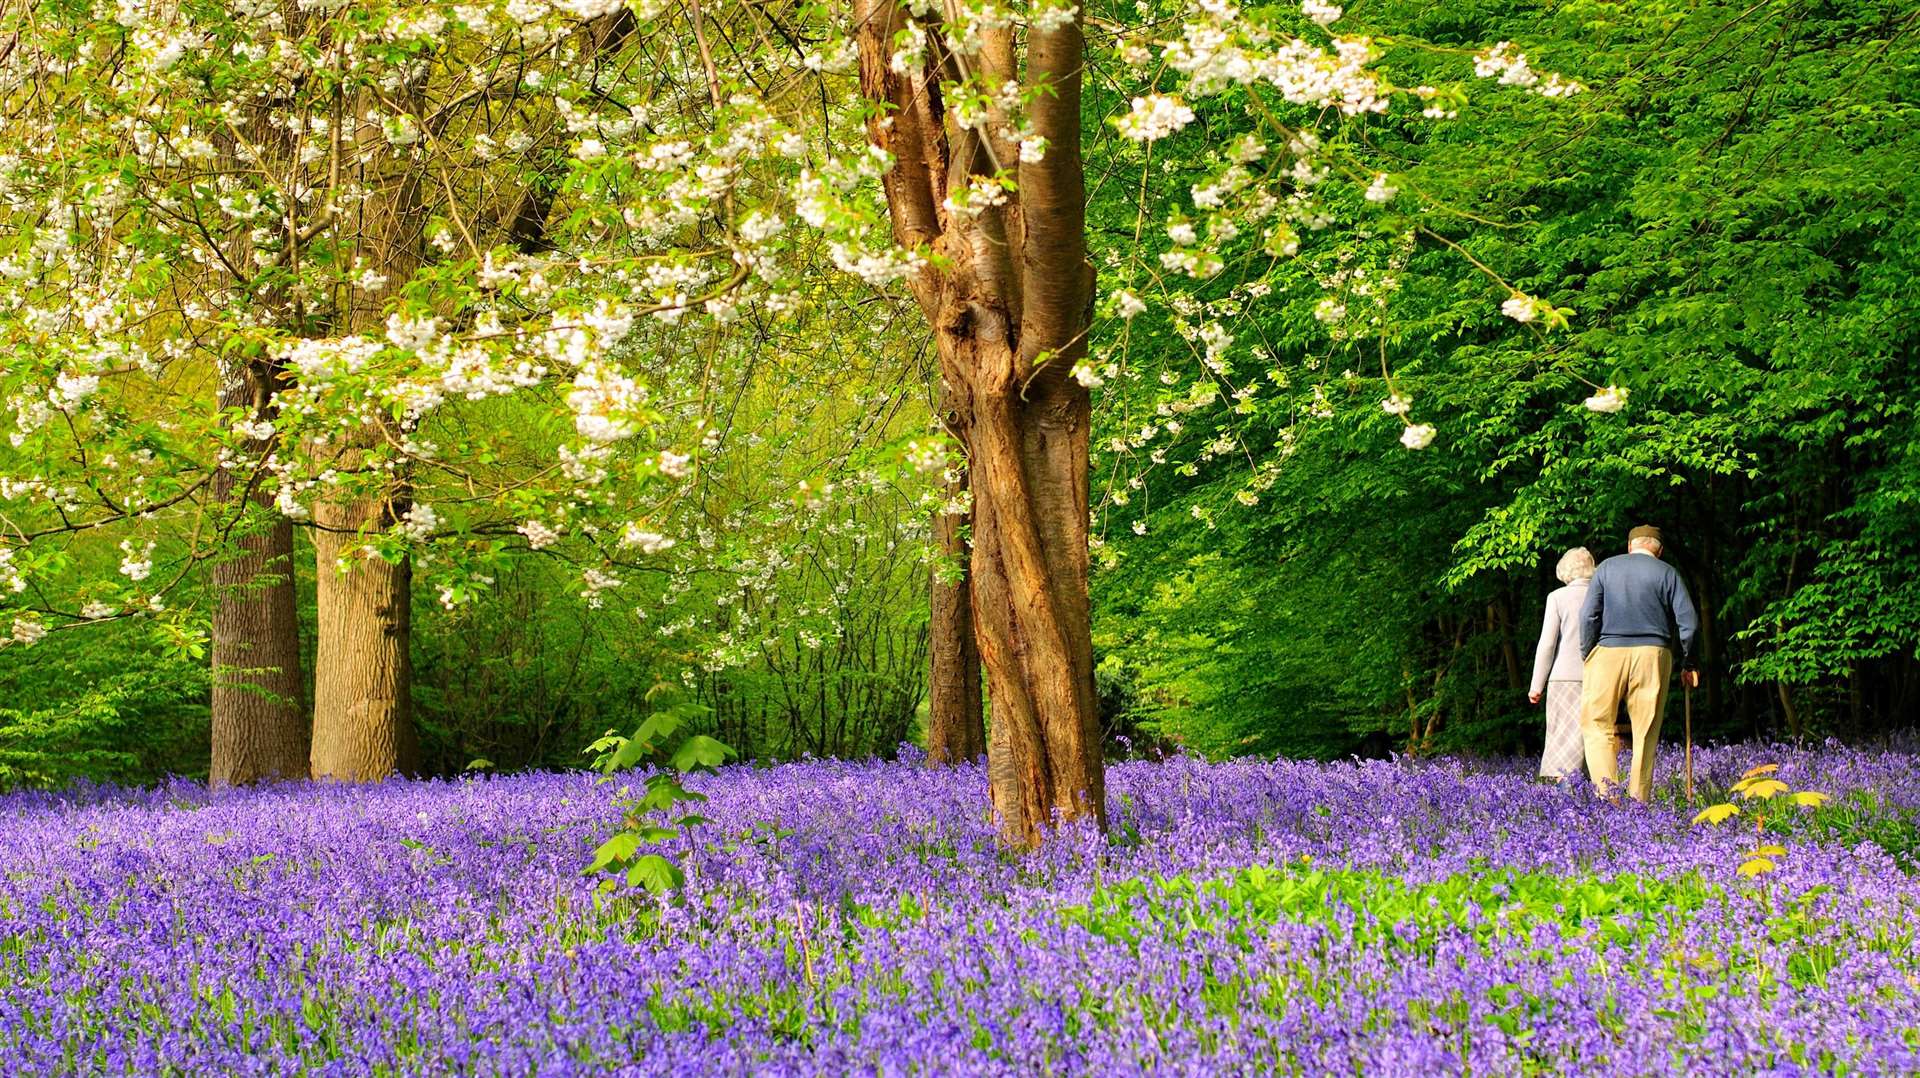 Hole Park’s Bluebell Spectacular is one of the highlights of the season